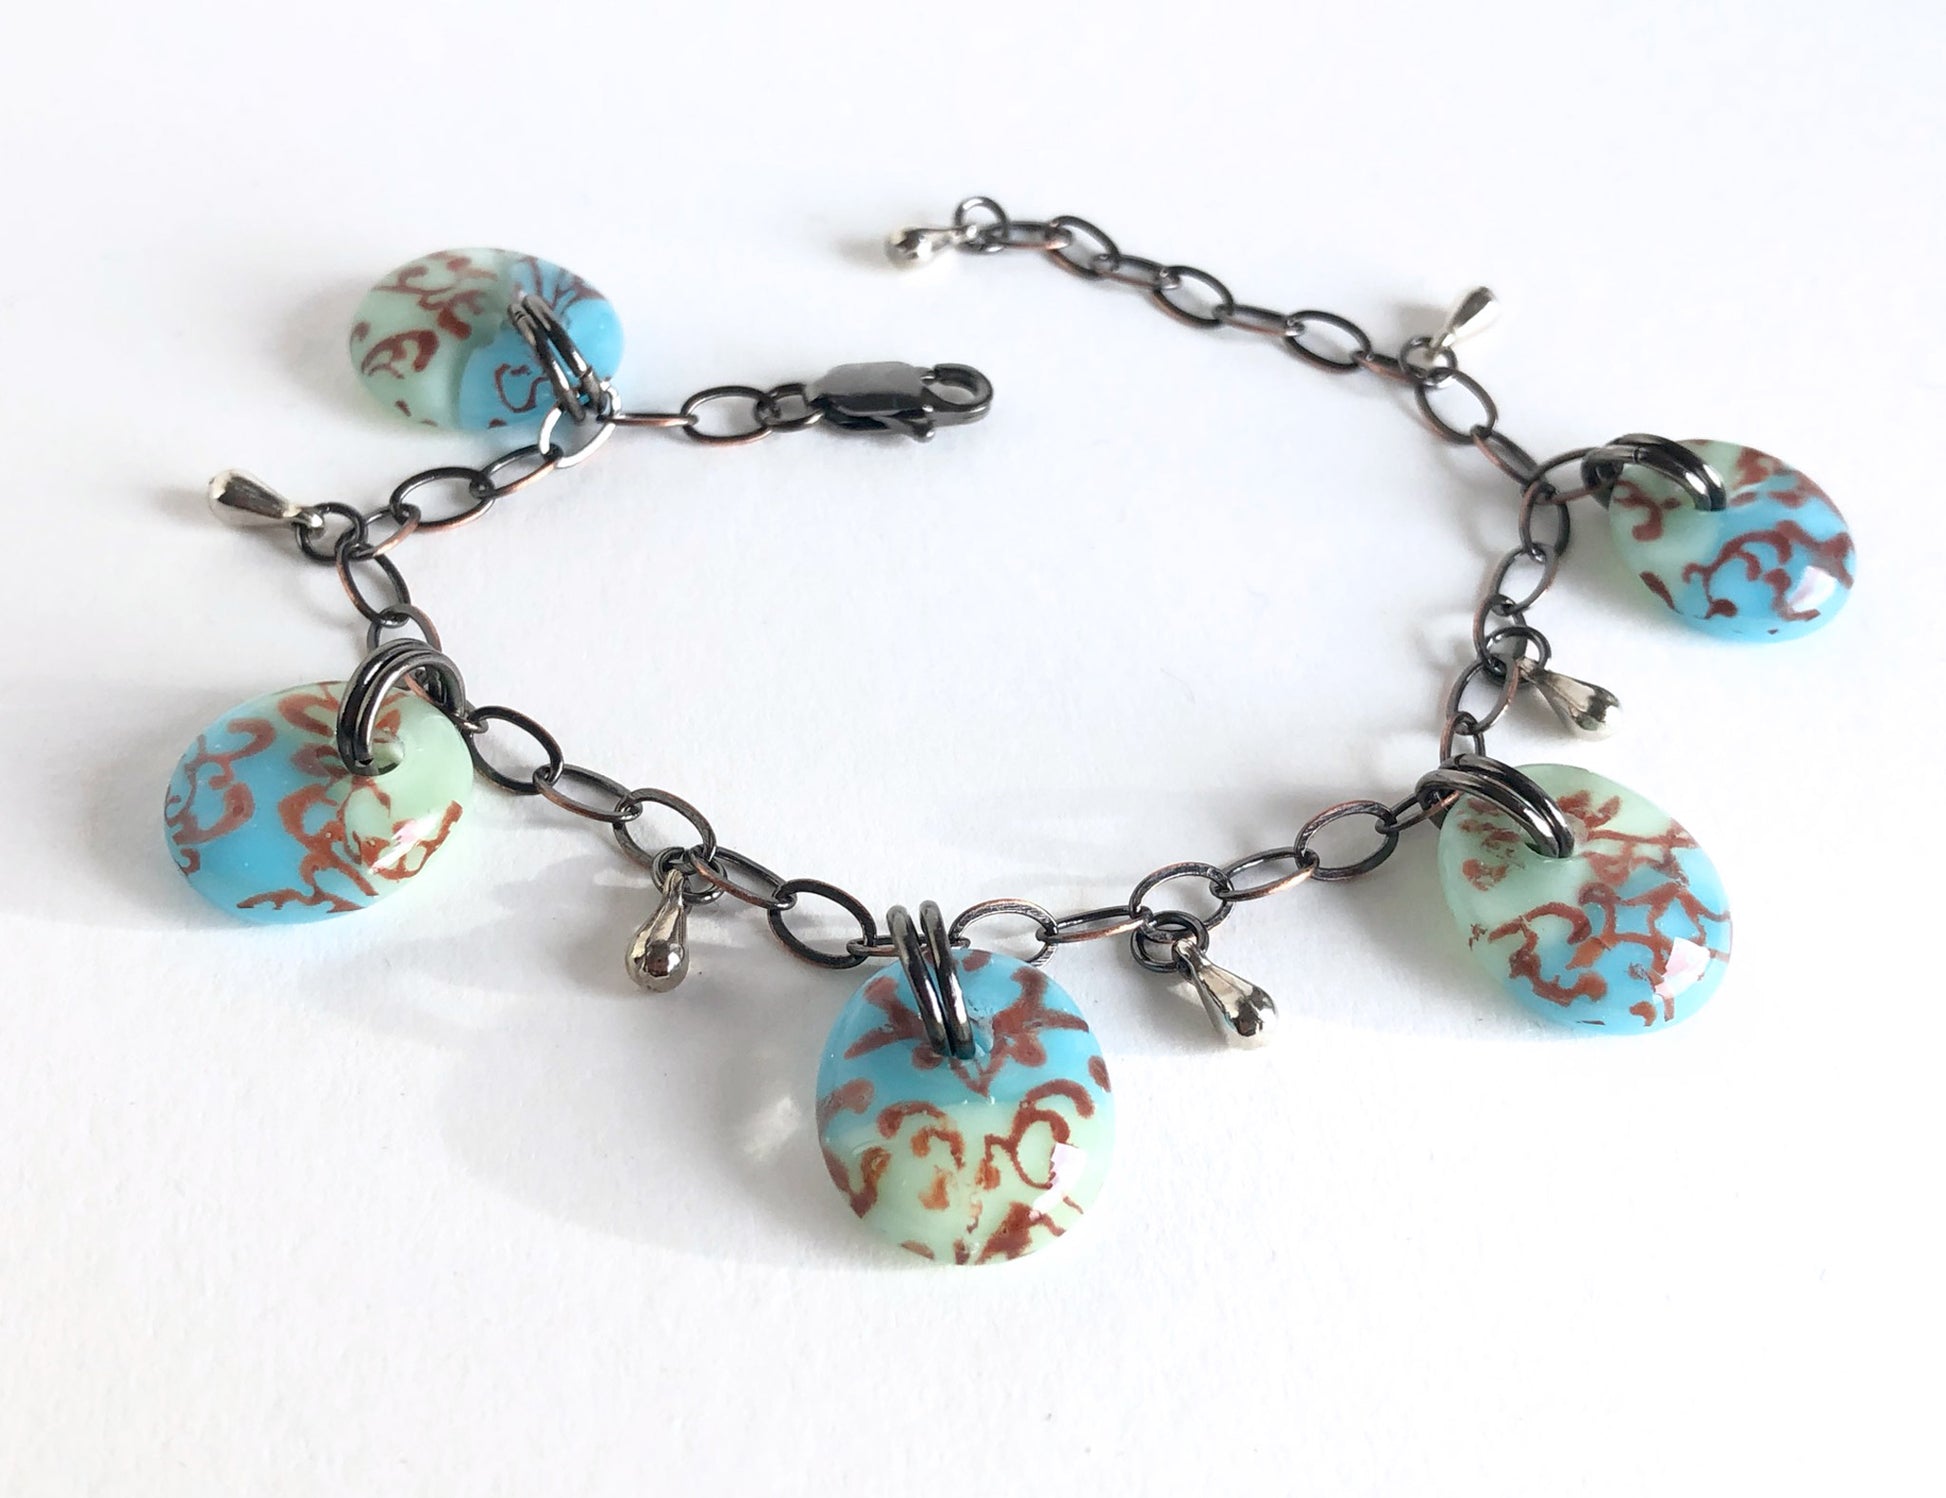 Charm bracelet with sepia tone filigree design on blue and green glass.